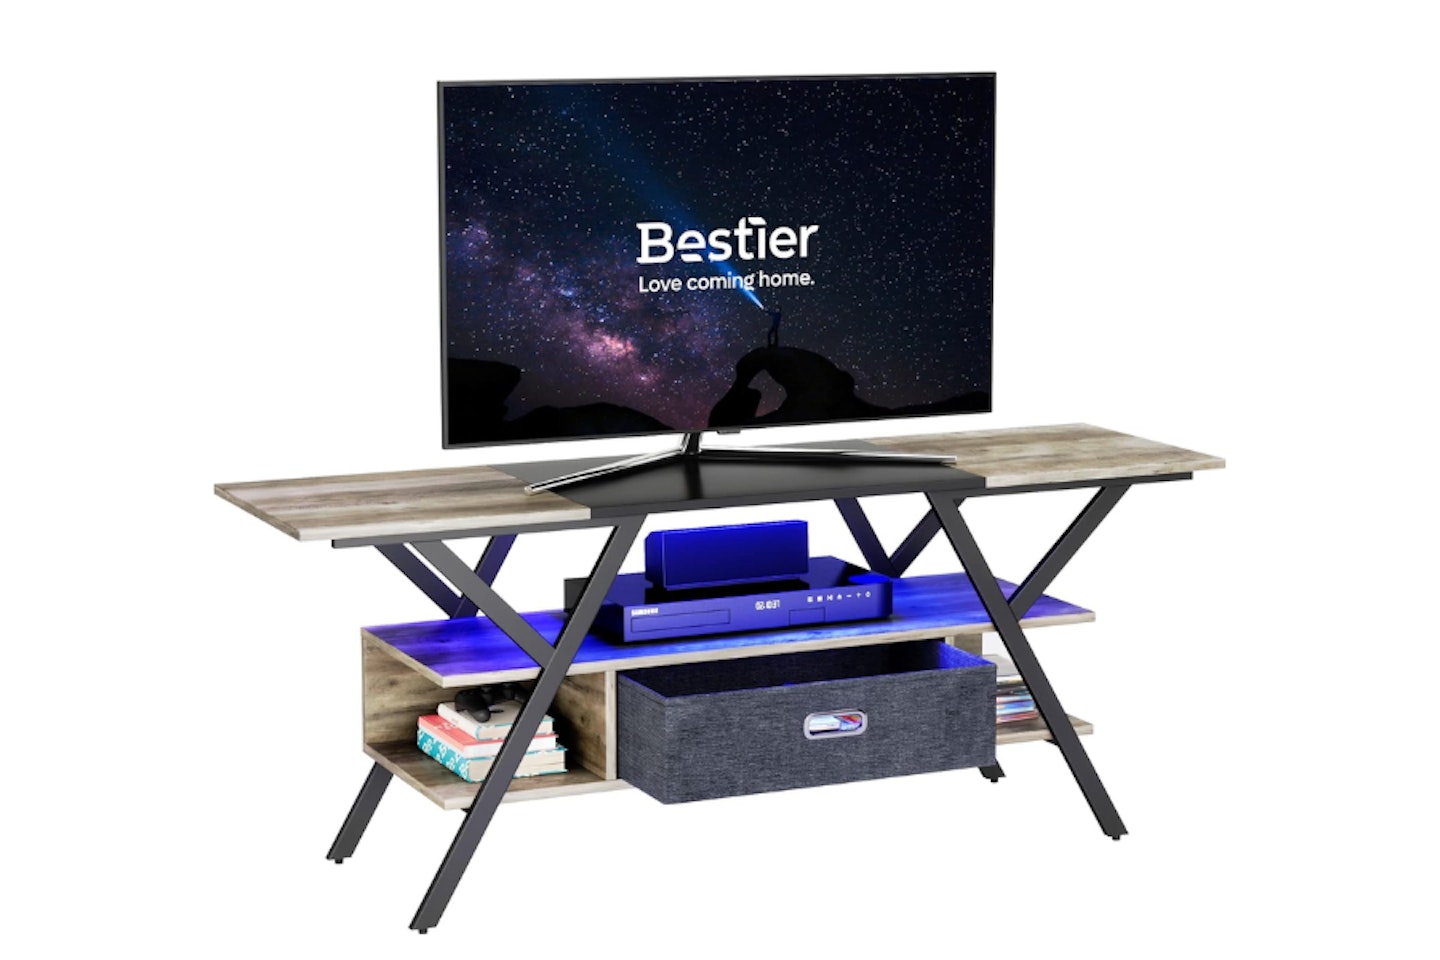 Bestier TV Gaming Entertainment Center TV Stand with LED Lights 